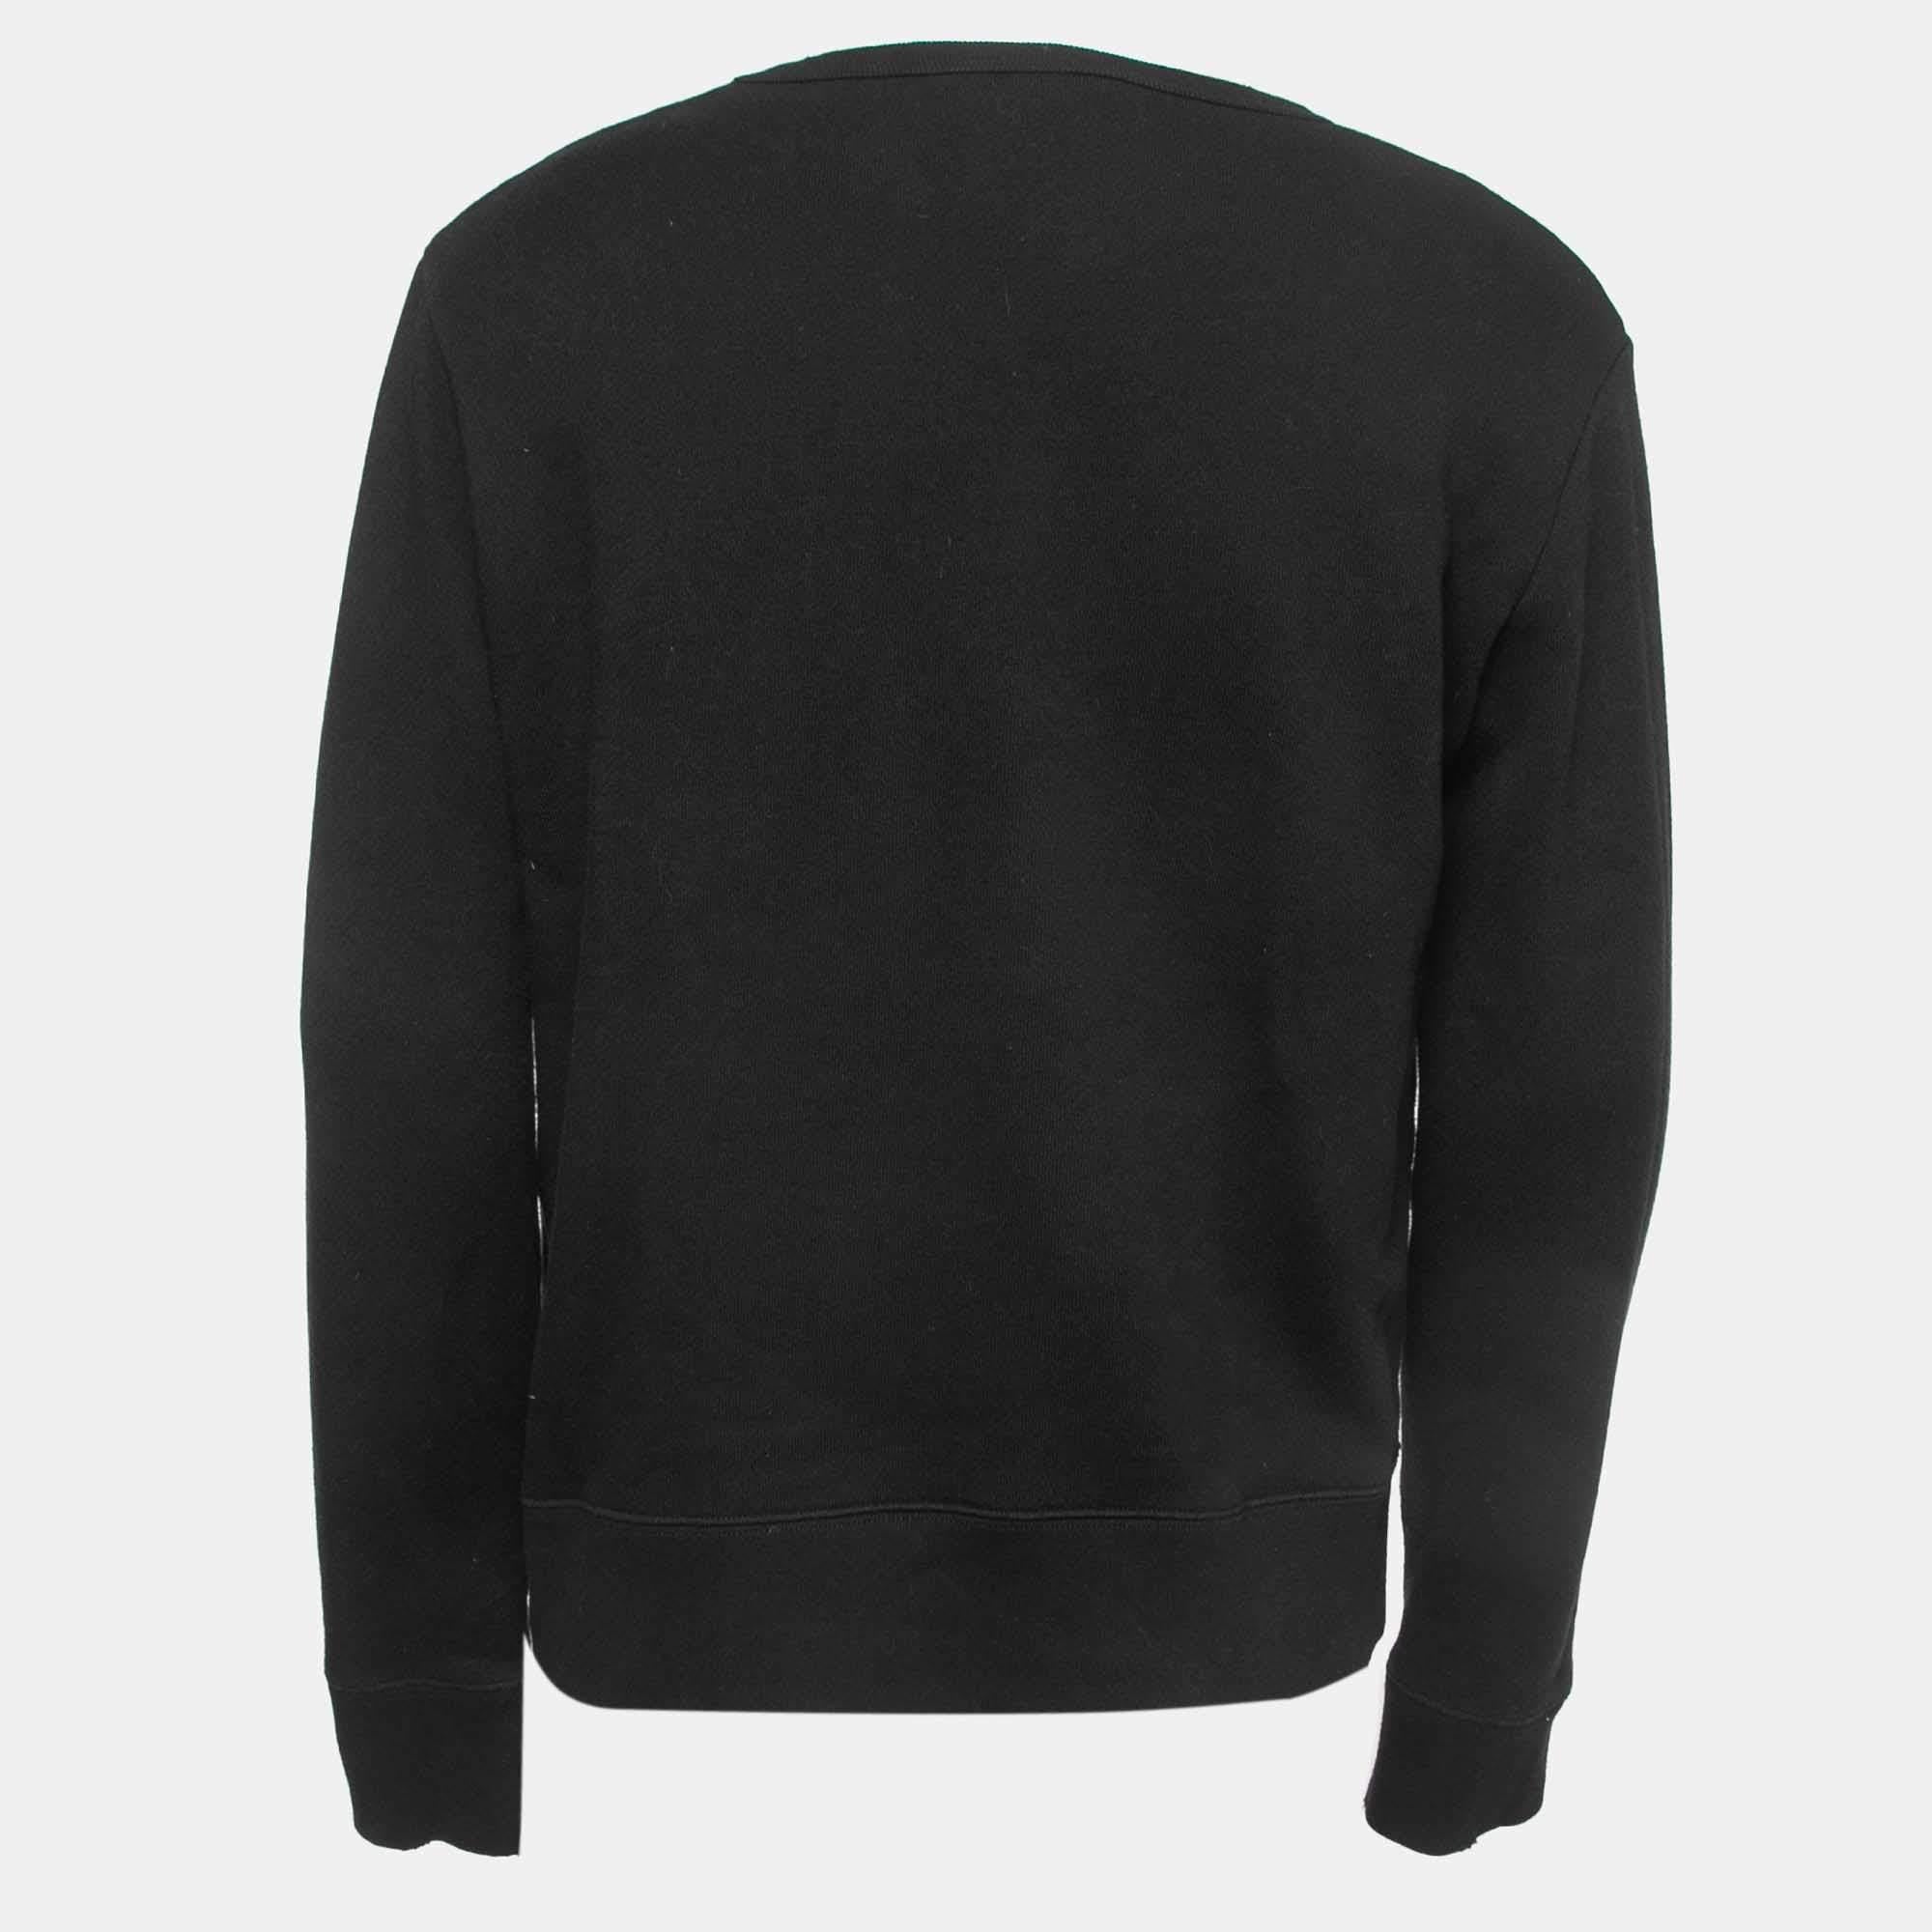 Experience comfort with never-ending style as you don this super-chic sweatshirt from Gucci. This sweatshirt has been designed using high-quality fabric which gives you a comfy fit.

